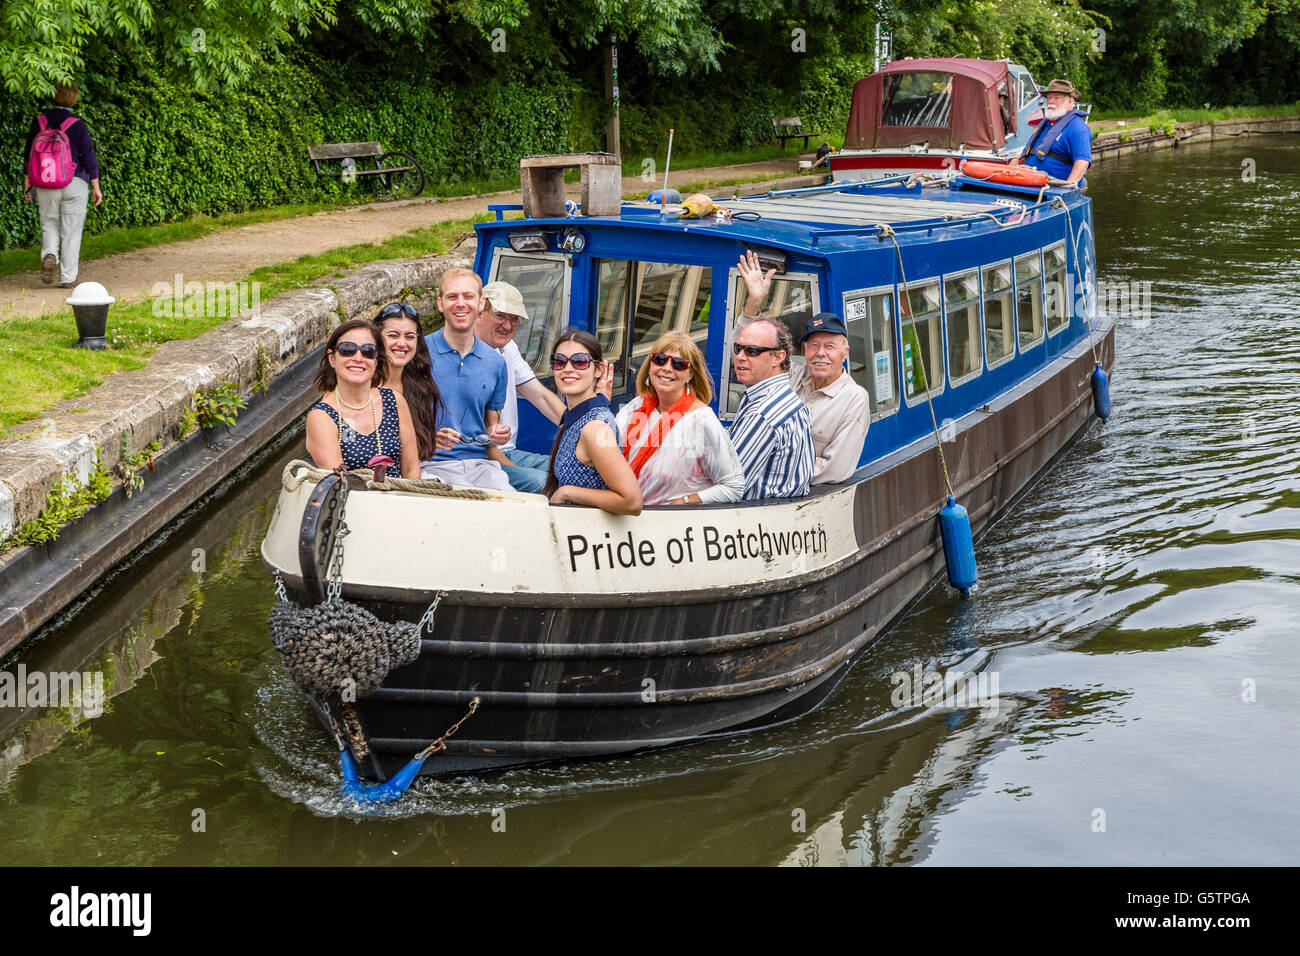 Family day out on a canal narrow boat on the Grand Union Canal London England UK Stock Photo